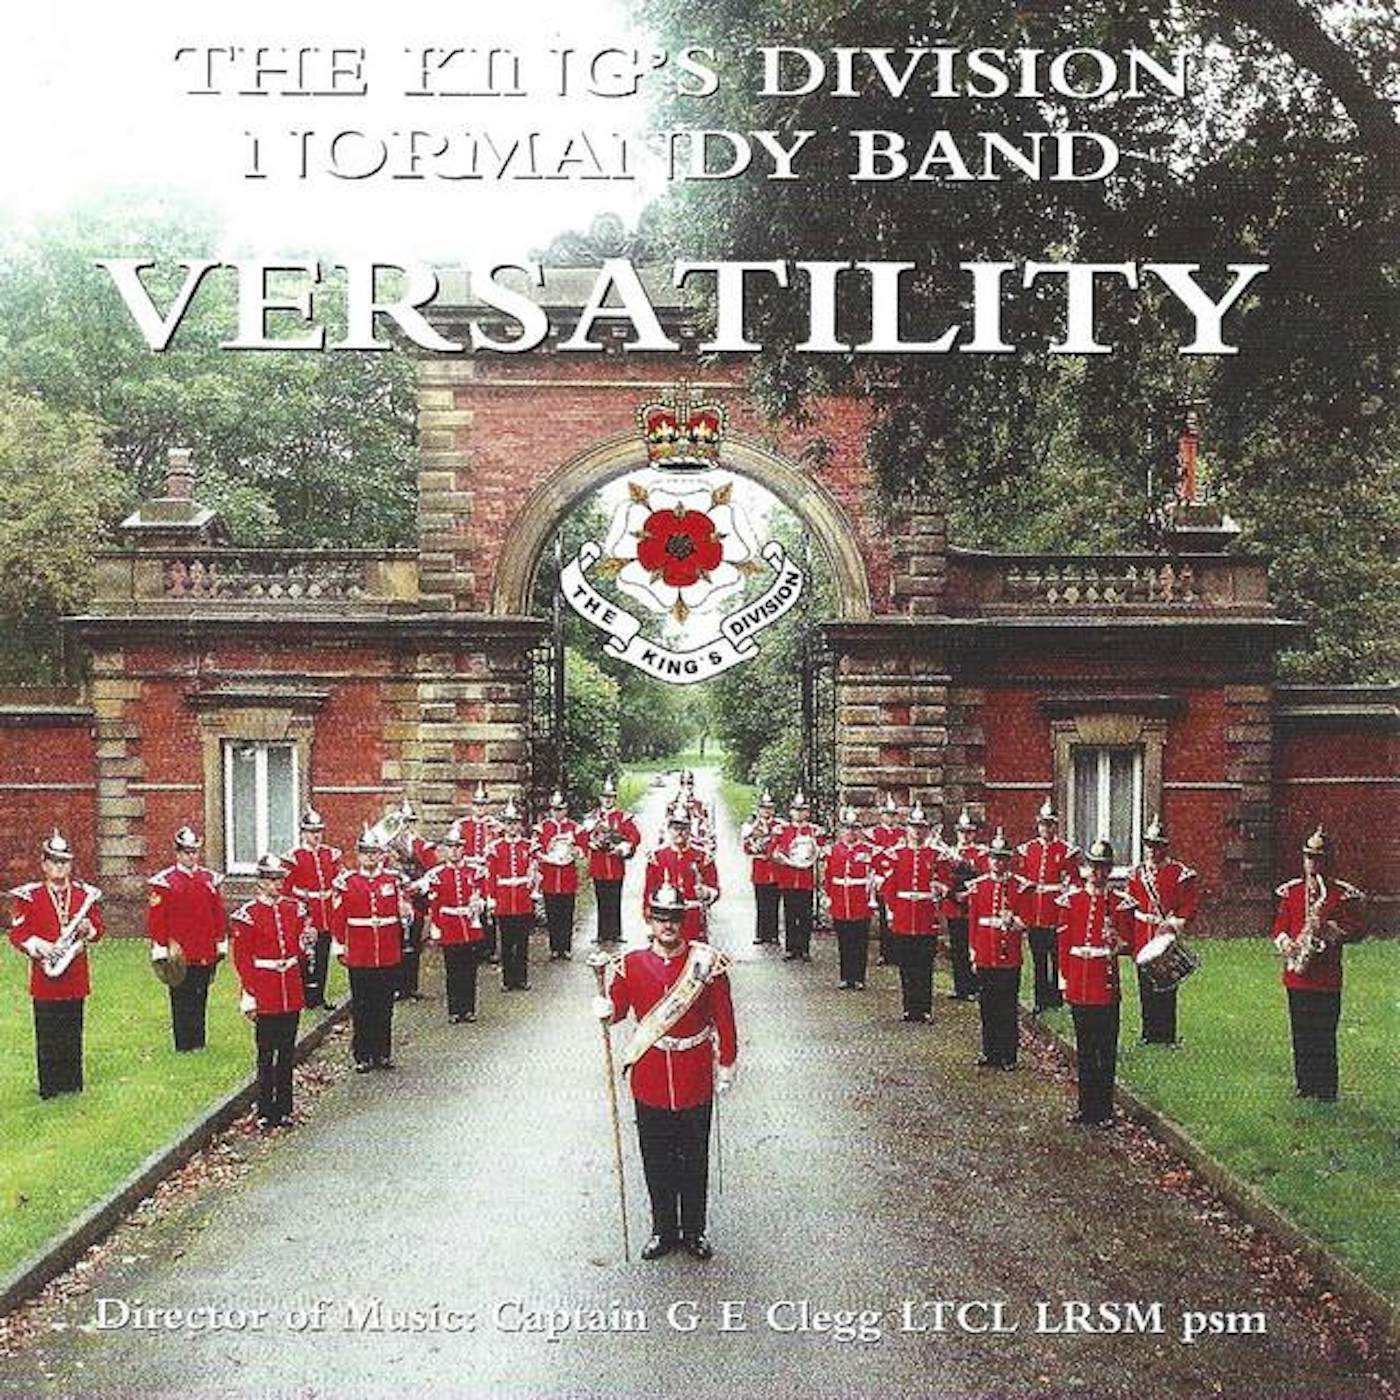 The King's Division Normandy Band